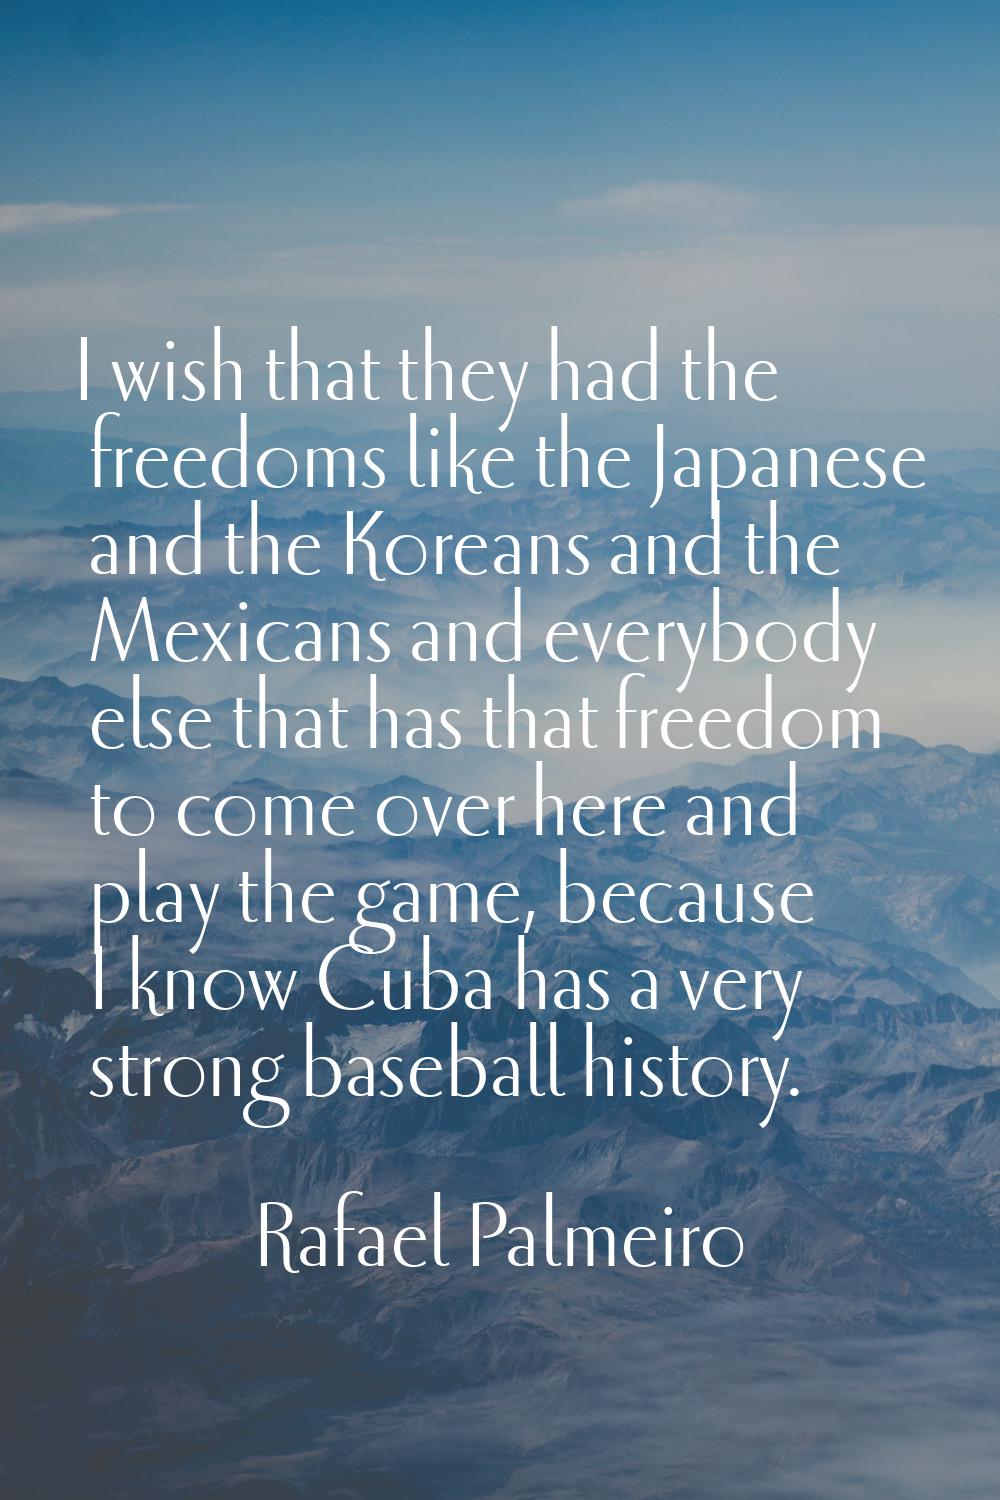 I wish that they had the freedoms like the Japanese and the Koreans and the Mexicans and everybody 